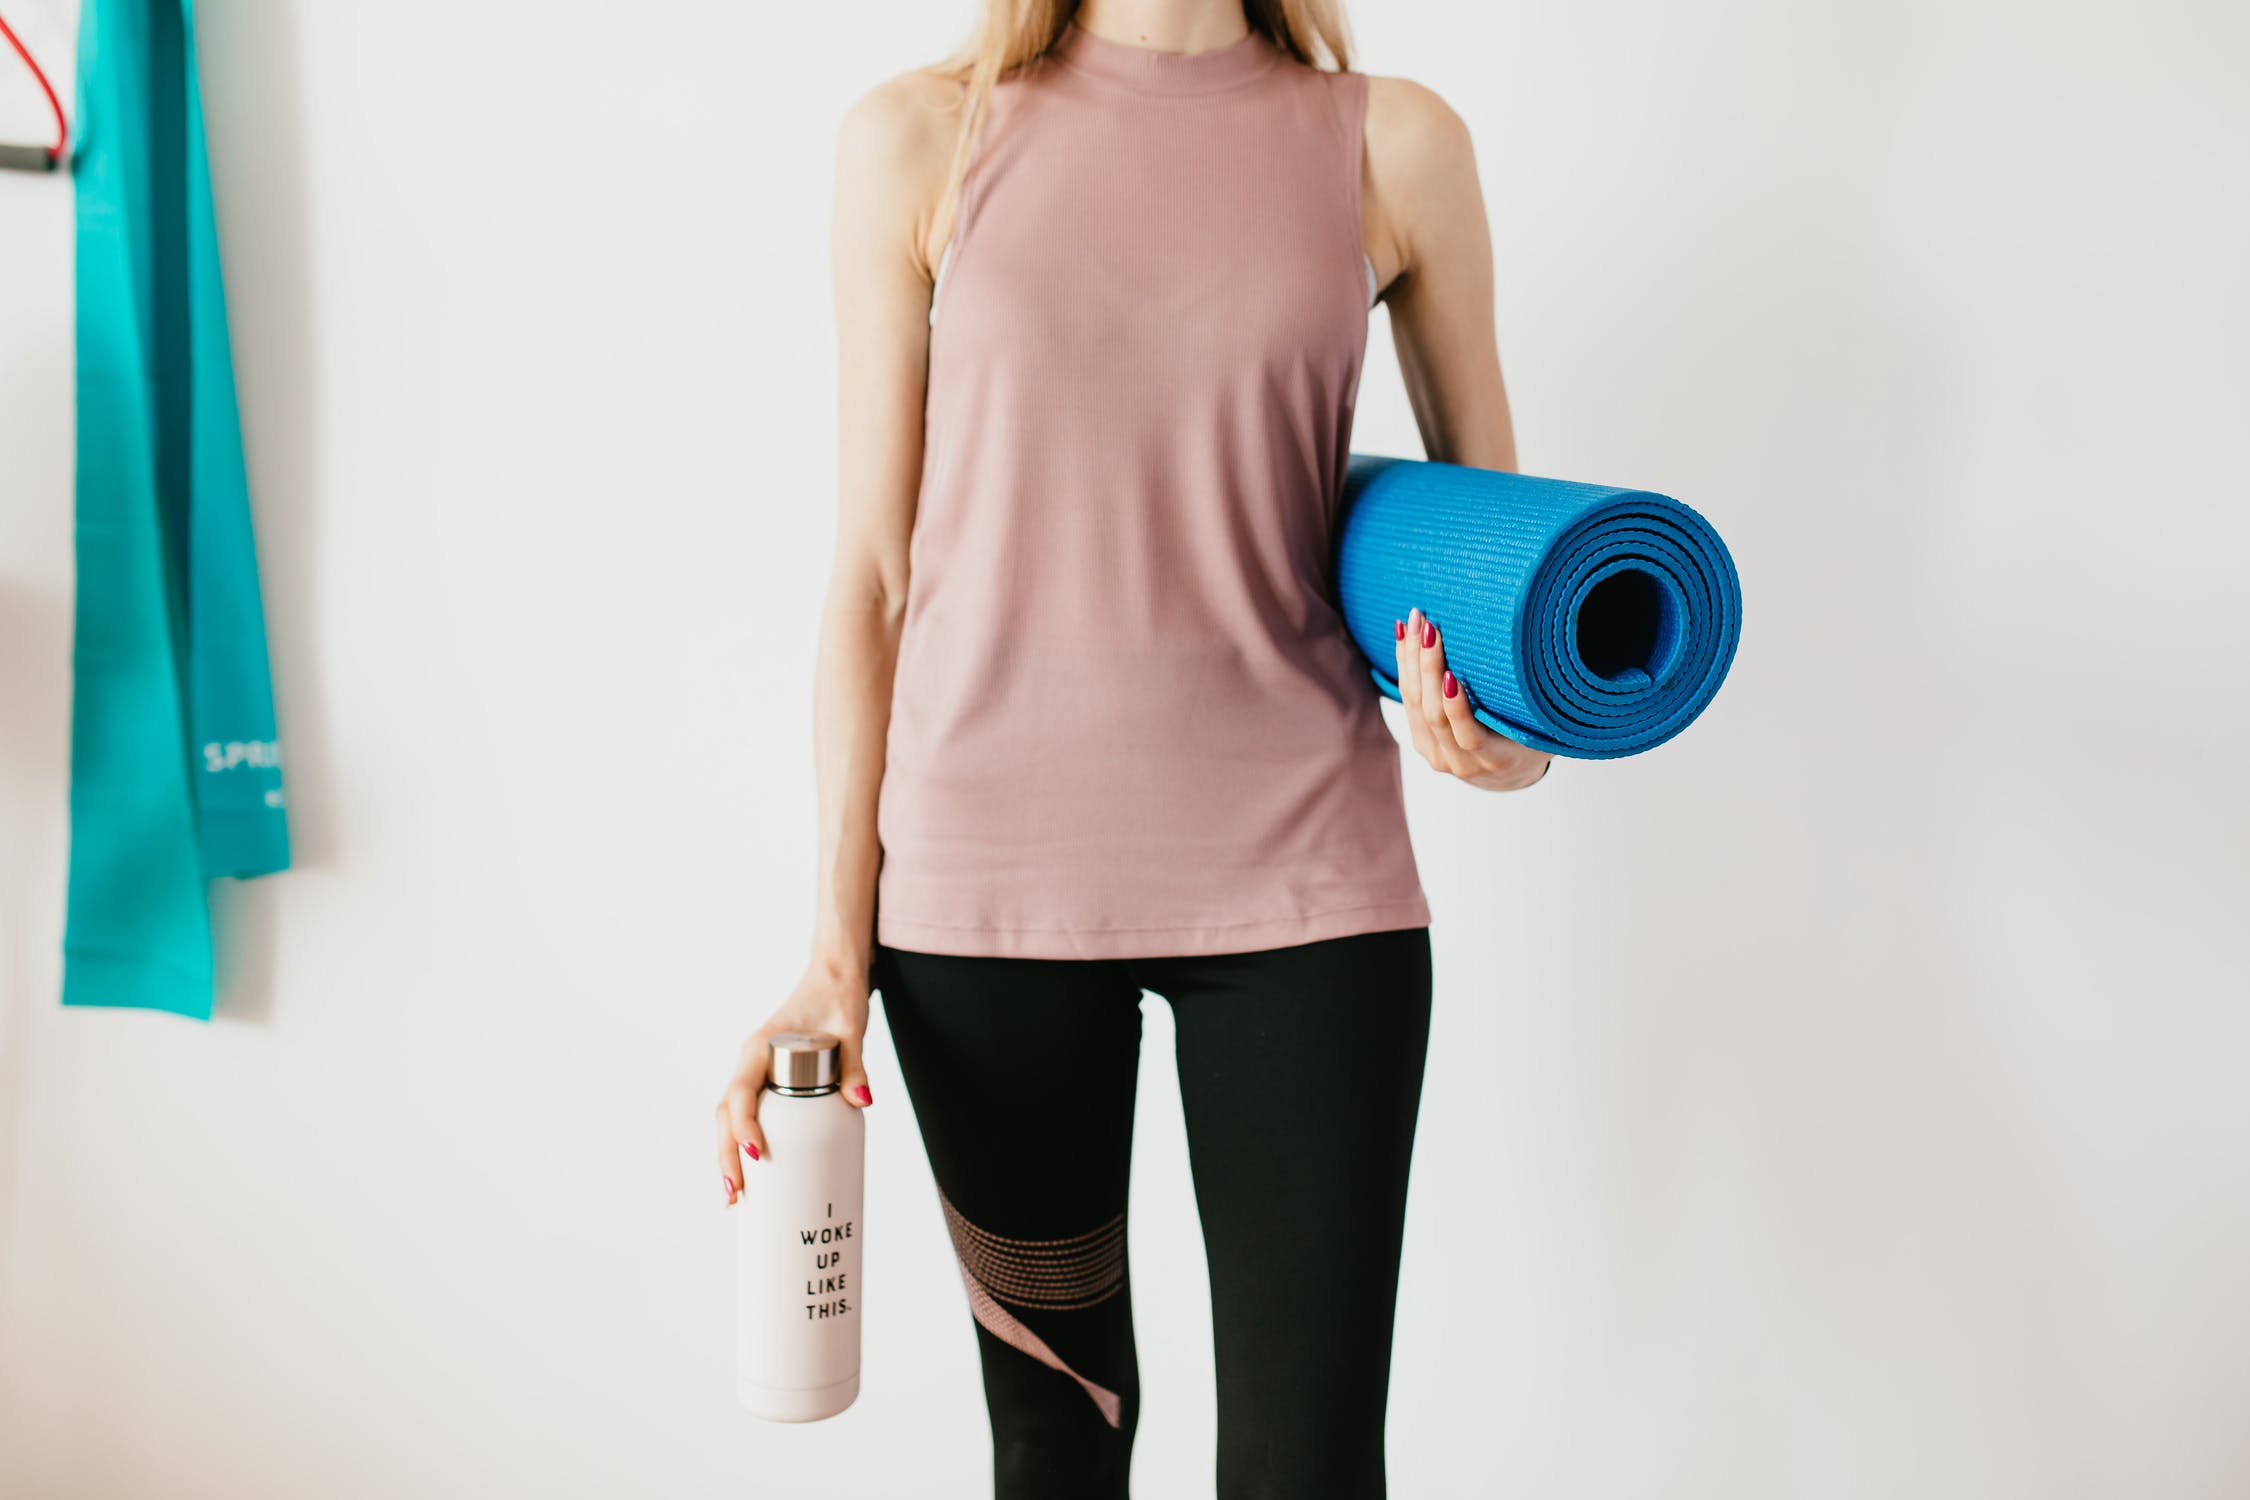 Best Fitness Gear - Yoga equipment and clothing